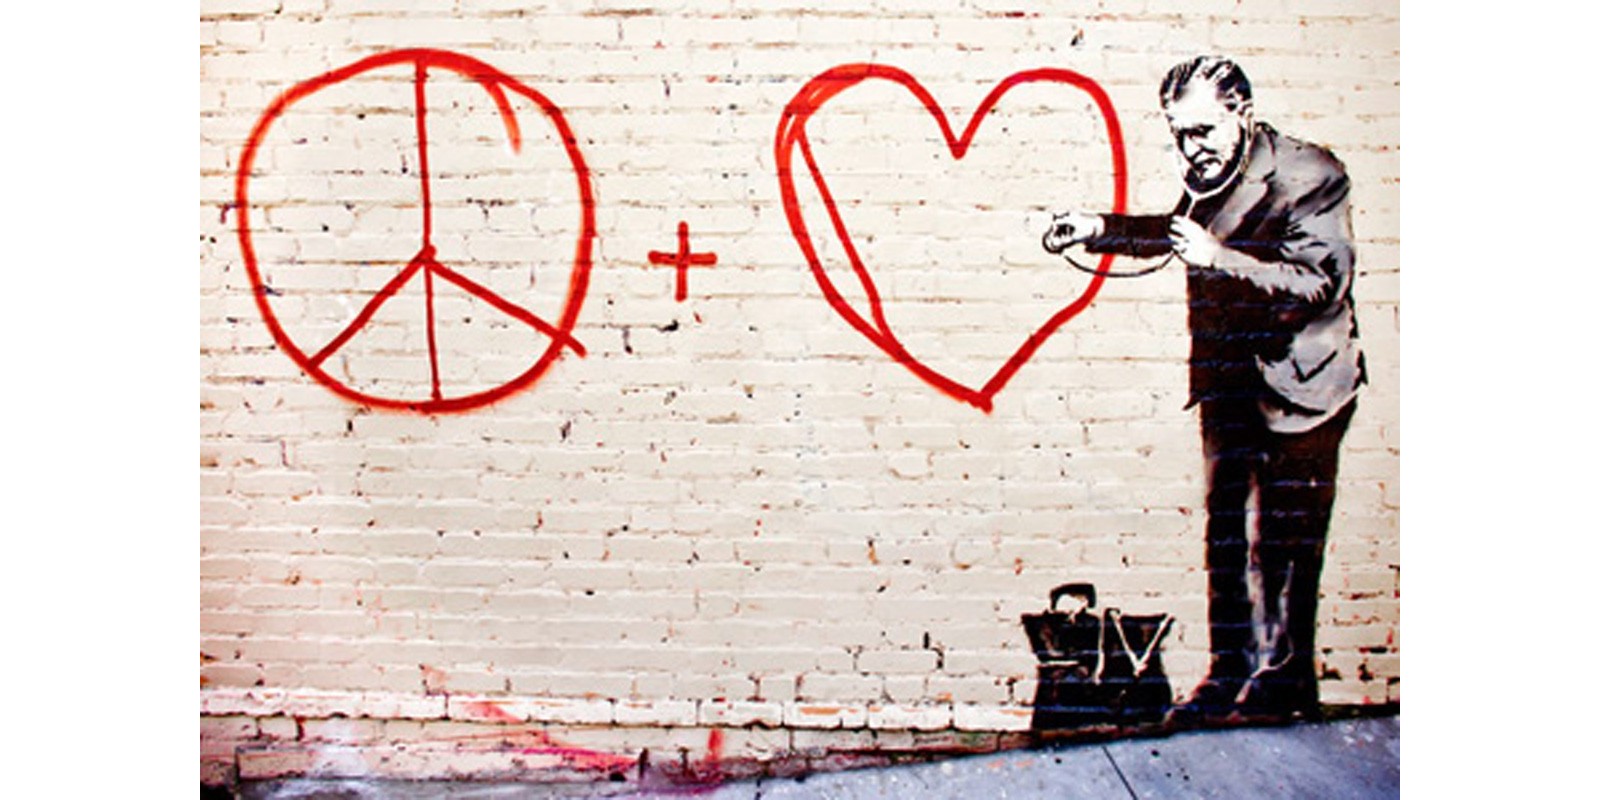 Banksy - Erie and Mission Street, San Francisco